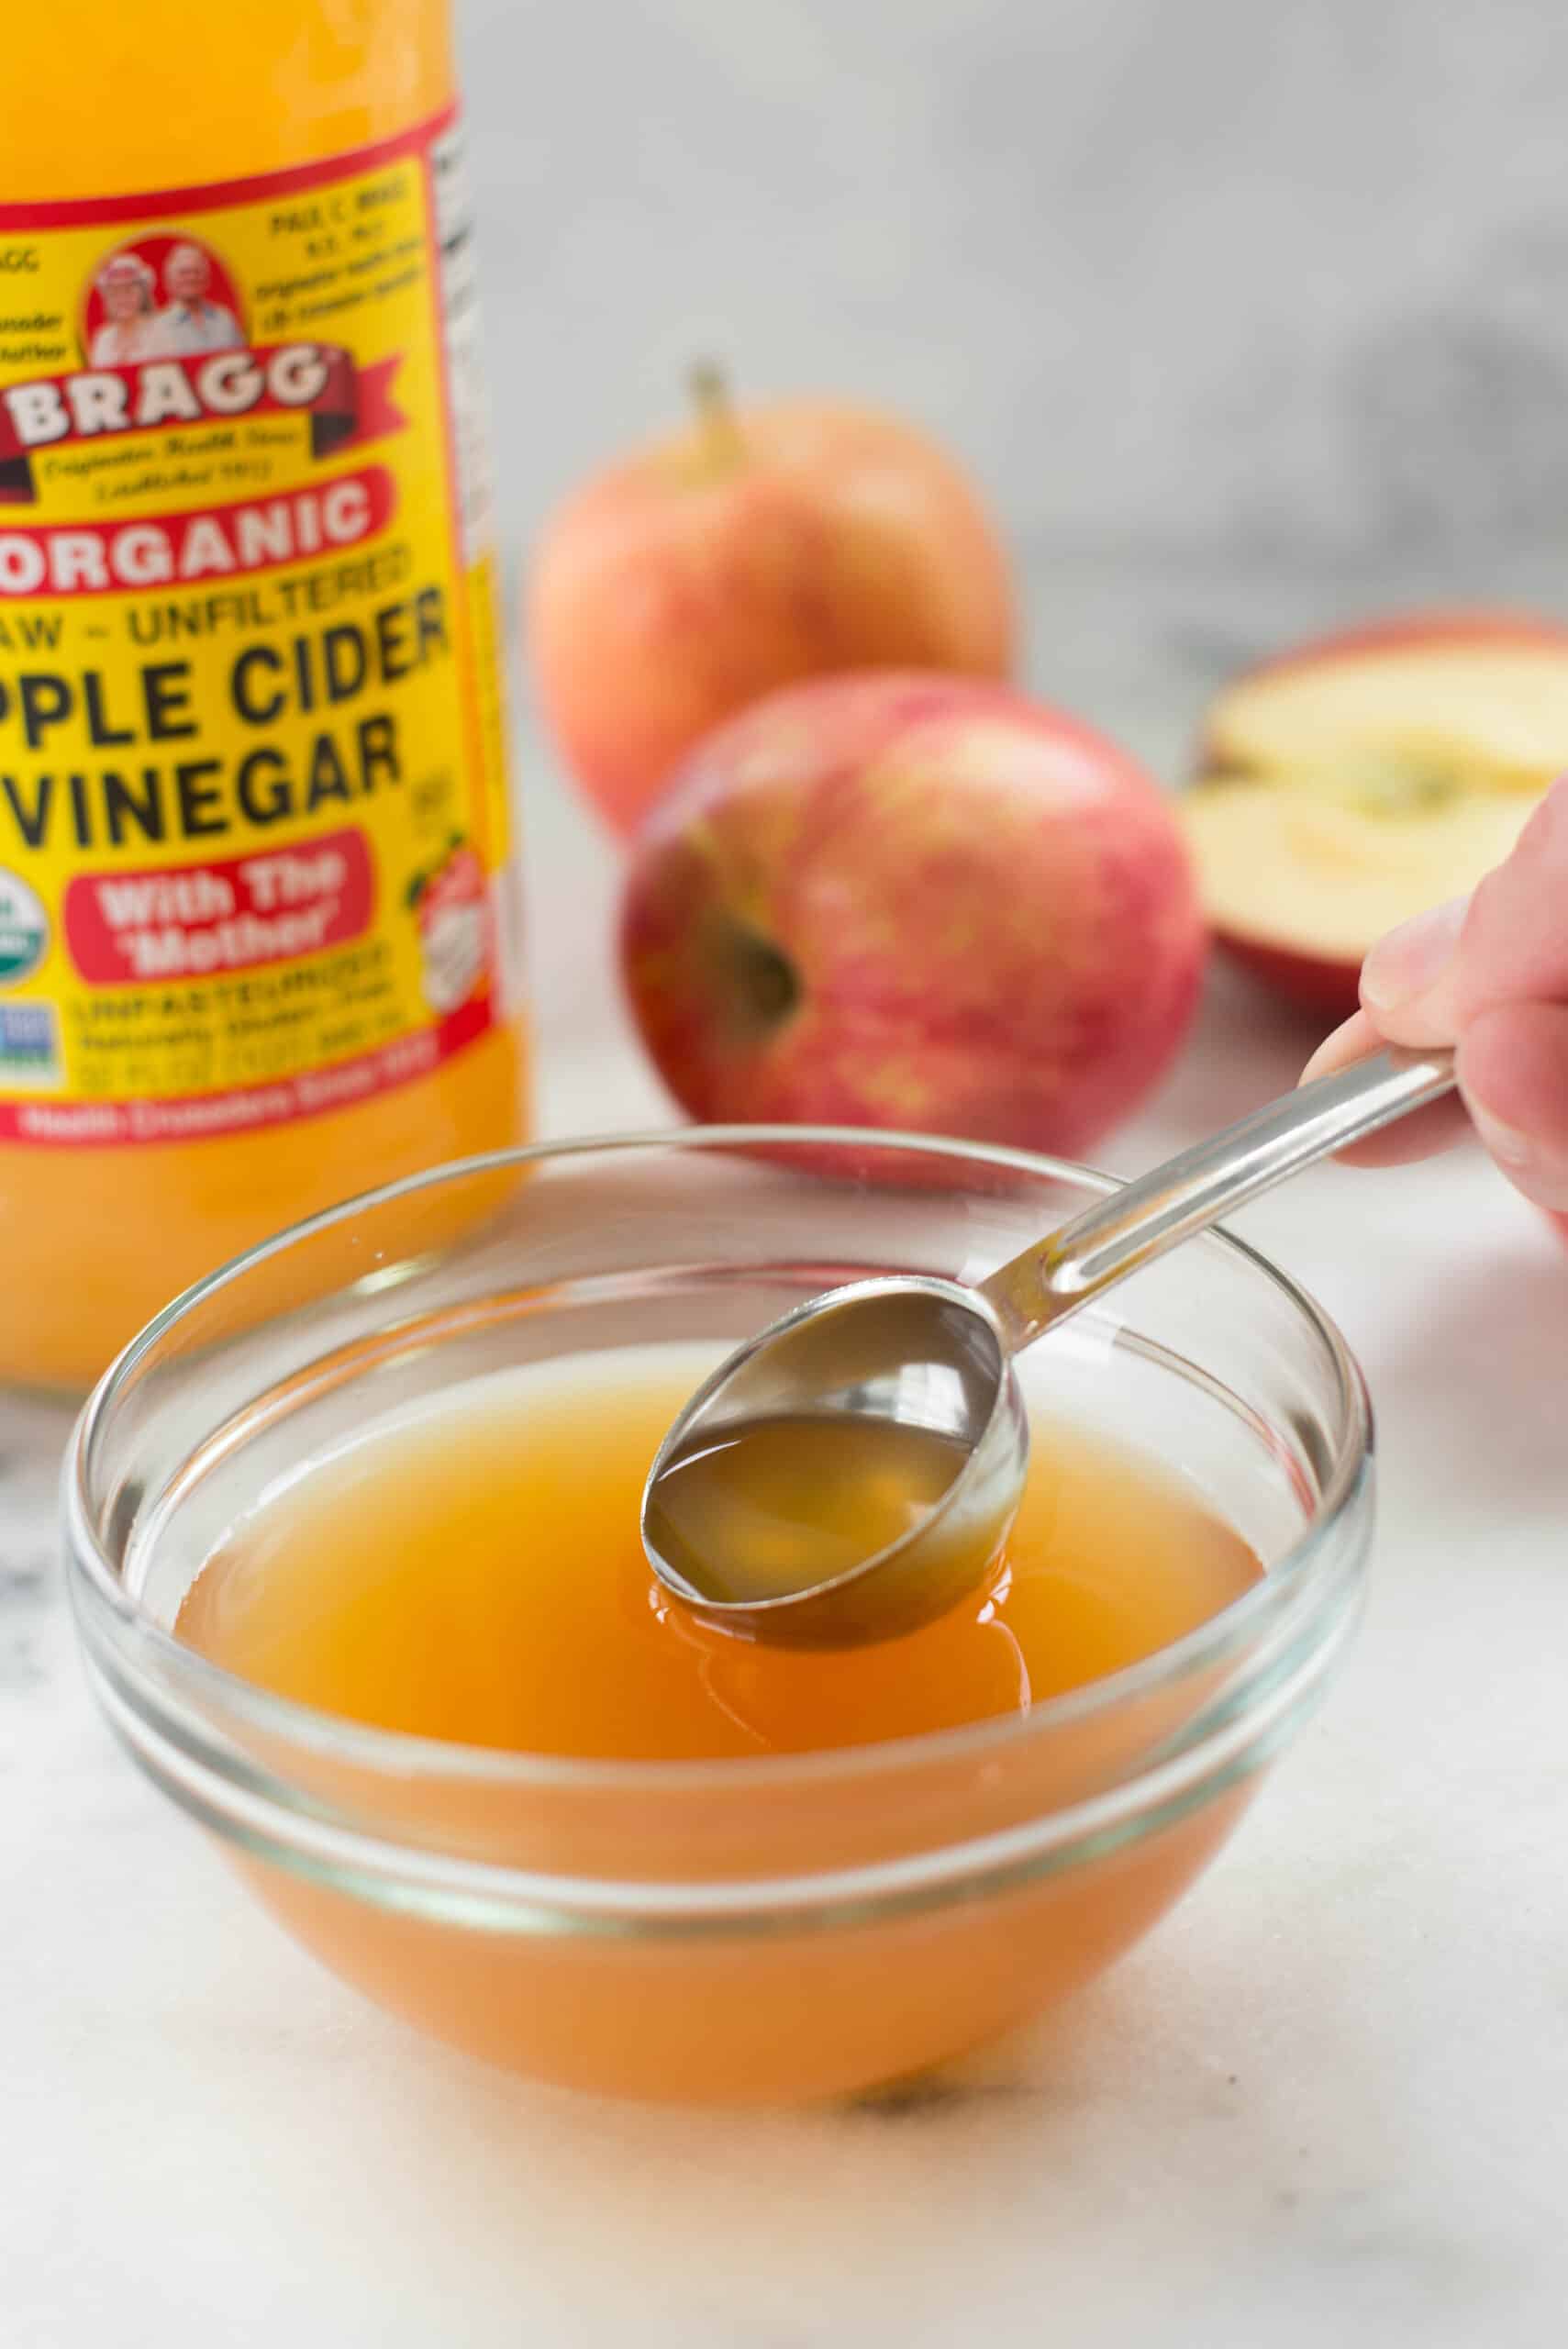 Taking a tablespoon of apple cider vinegar from a bowl filled with apple cider vinegar. In the background can be seen the apple cider vinegar bottle and some apples.